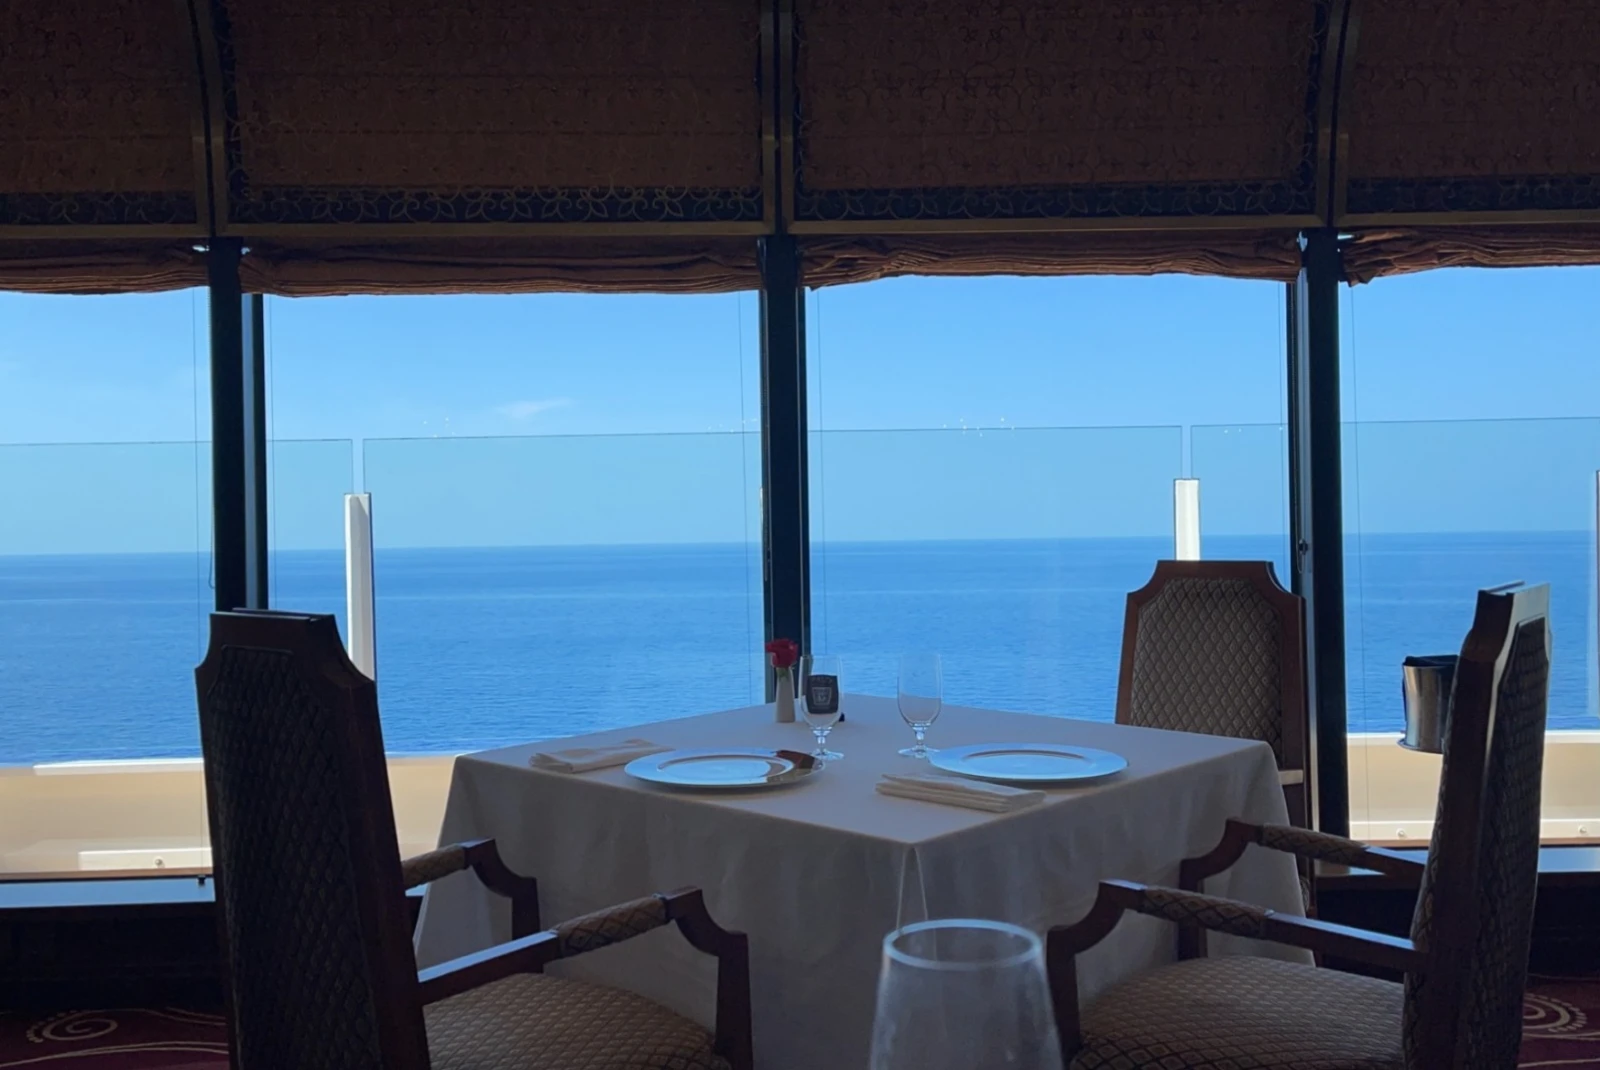 A restaurant on cruise with sea in the background.